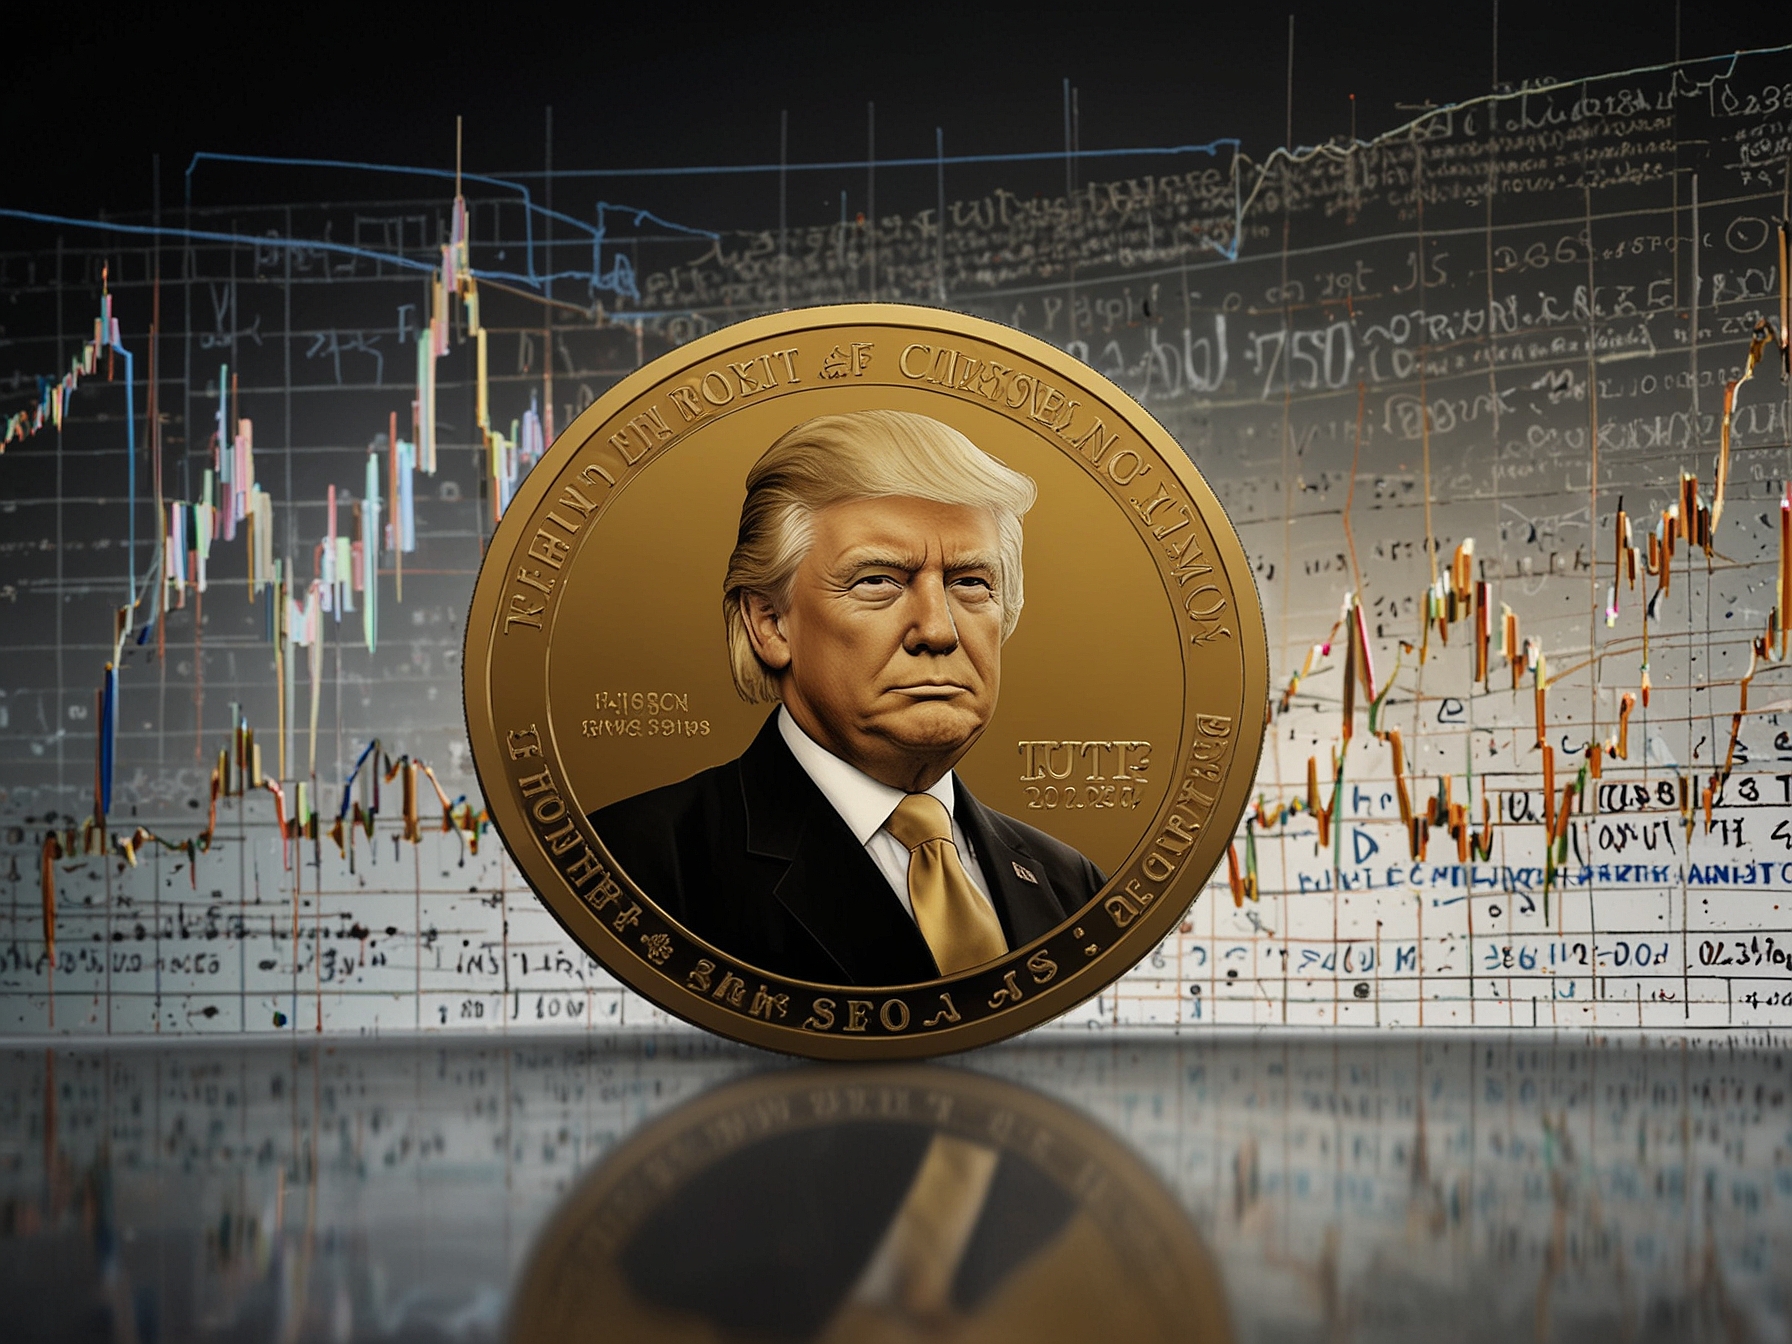 A graphic representation of a golden DJT TrumpCoin with digital codes in the background, emphasizing its rapid increase in value and market interest sparked by rumored Trump family associations.